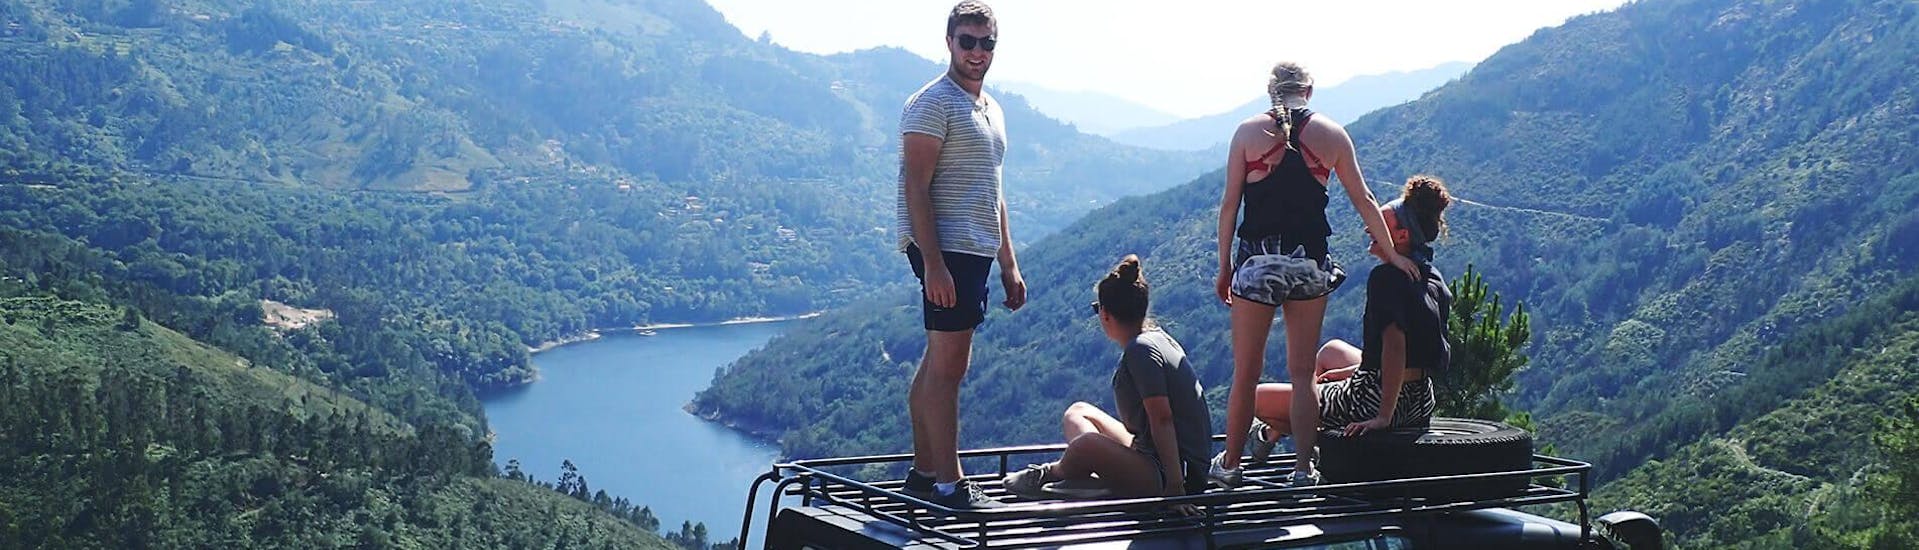 A group of young people is enjoying the view of the spectacular landscape around them from the top of a jeep provided by Oporto Adventure Tours.